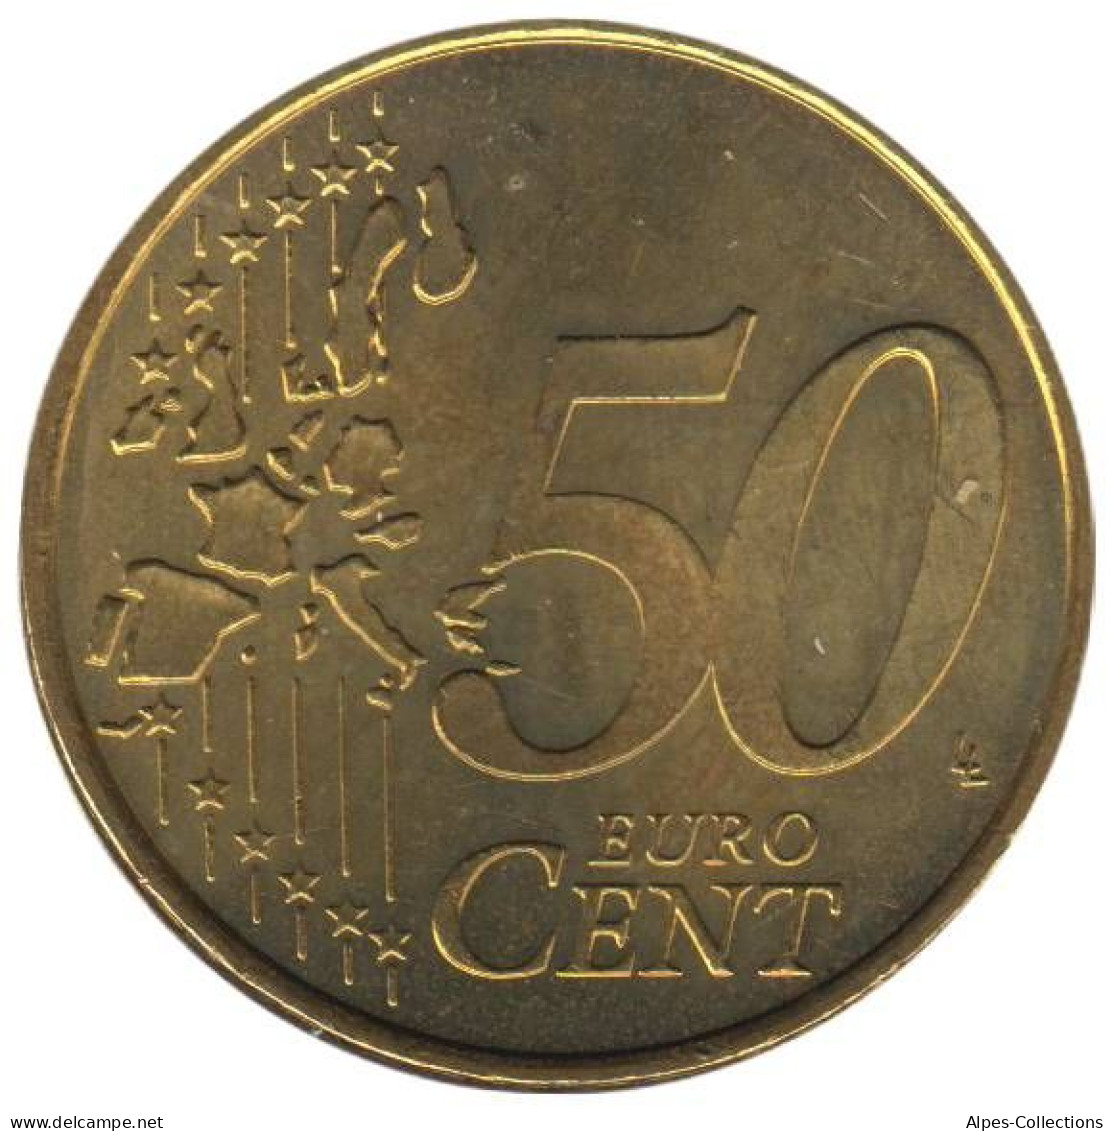 AL05002.1F - ALLEMAGNE - 50 Cents D'euro - 2002 F - Germany